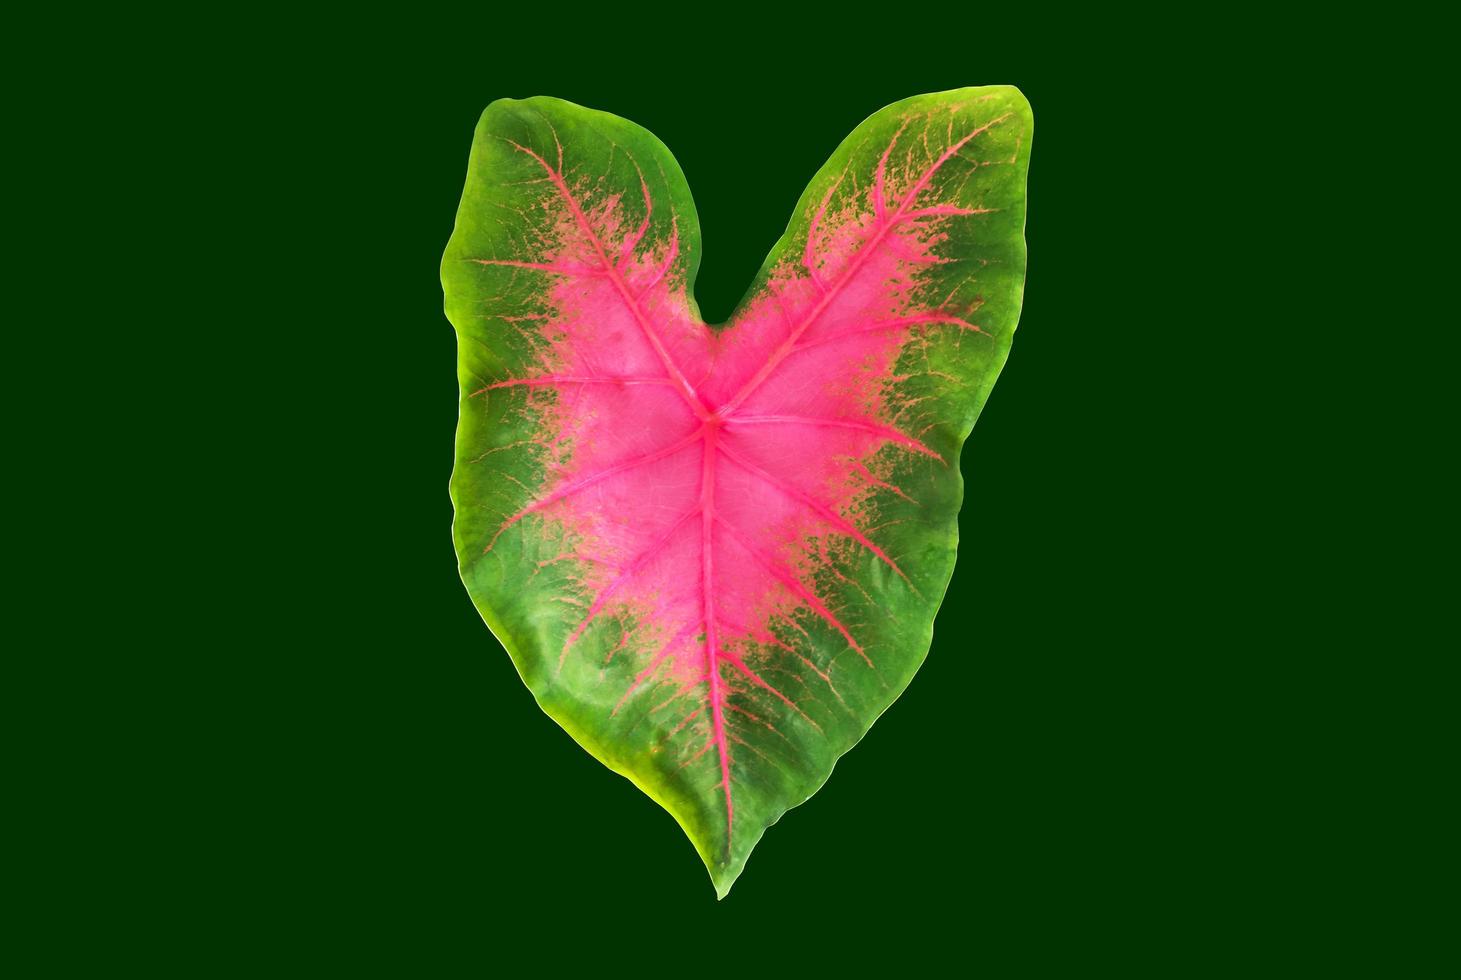 Isolated Alocasia Caladium leaf on white background with clipping paths. photo